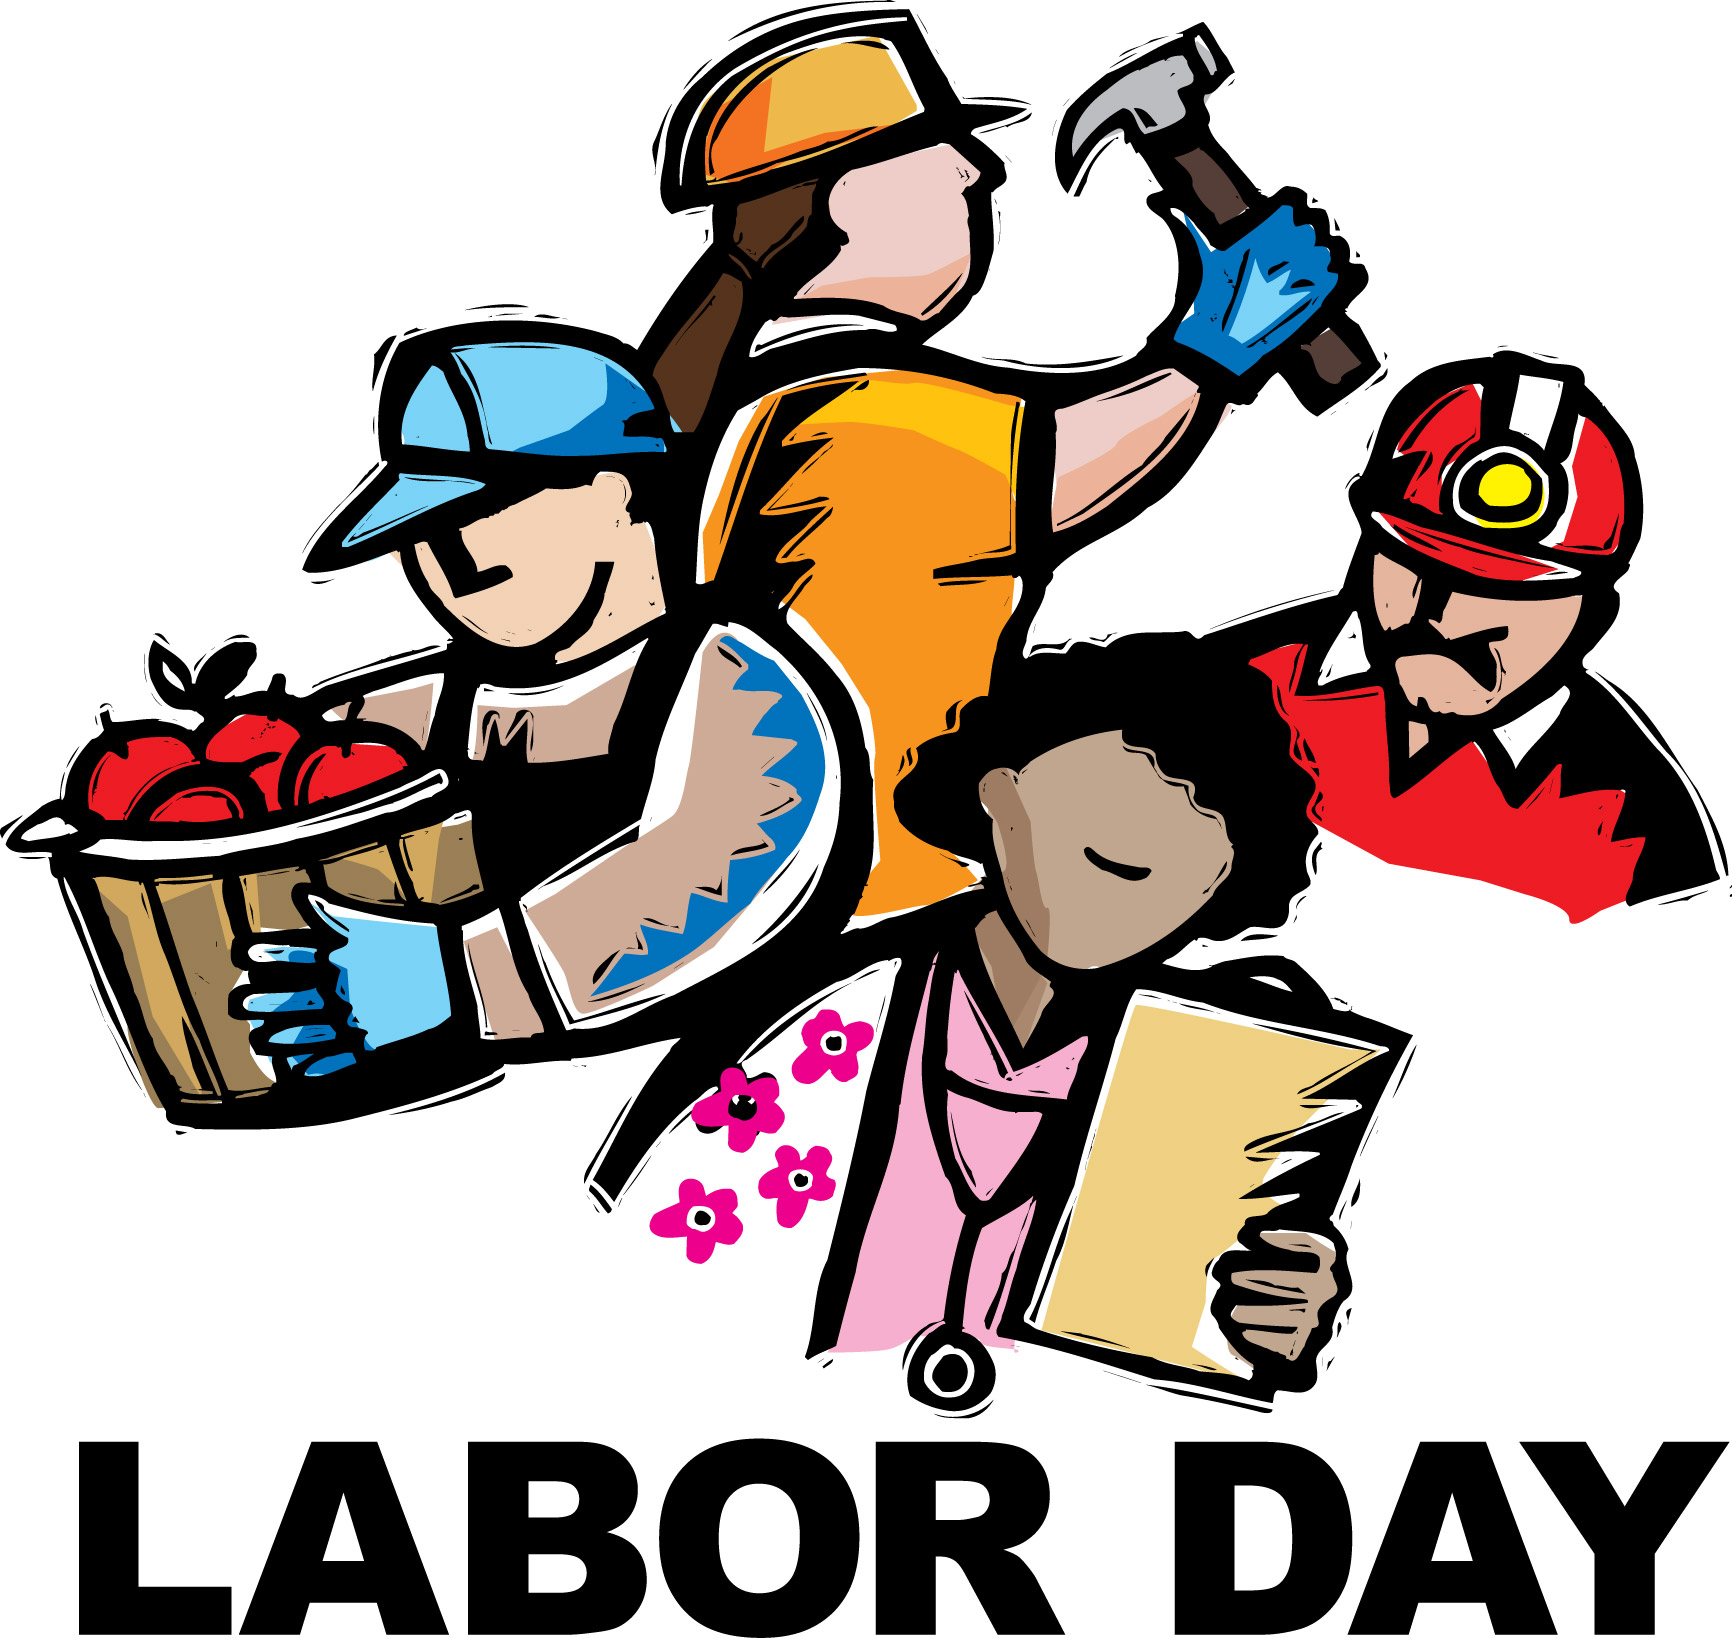 Labor day clip art to send labor dayments images graphics 